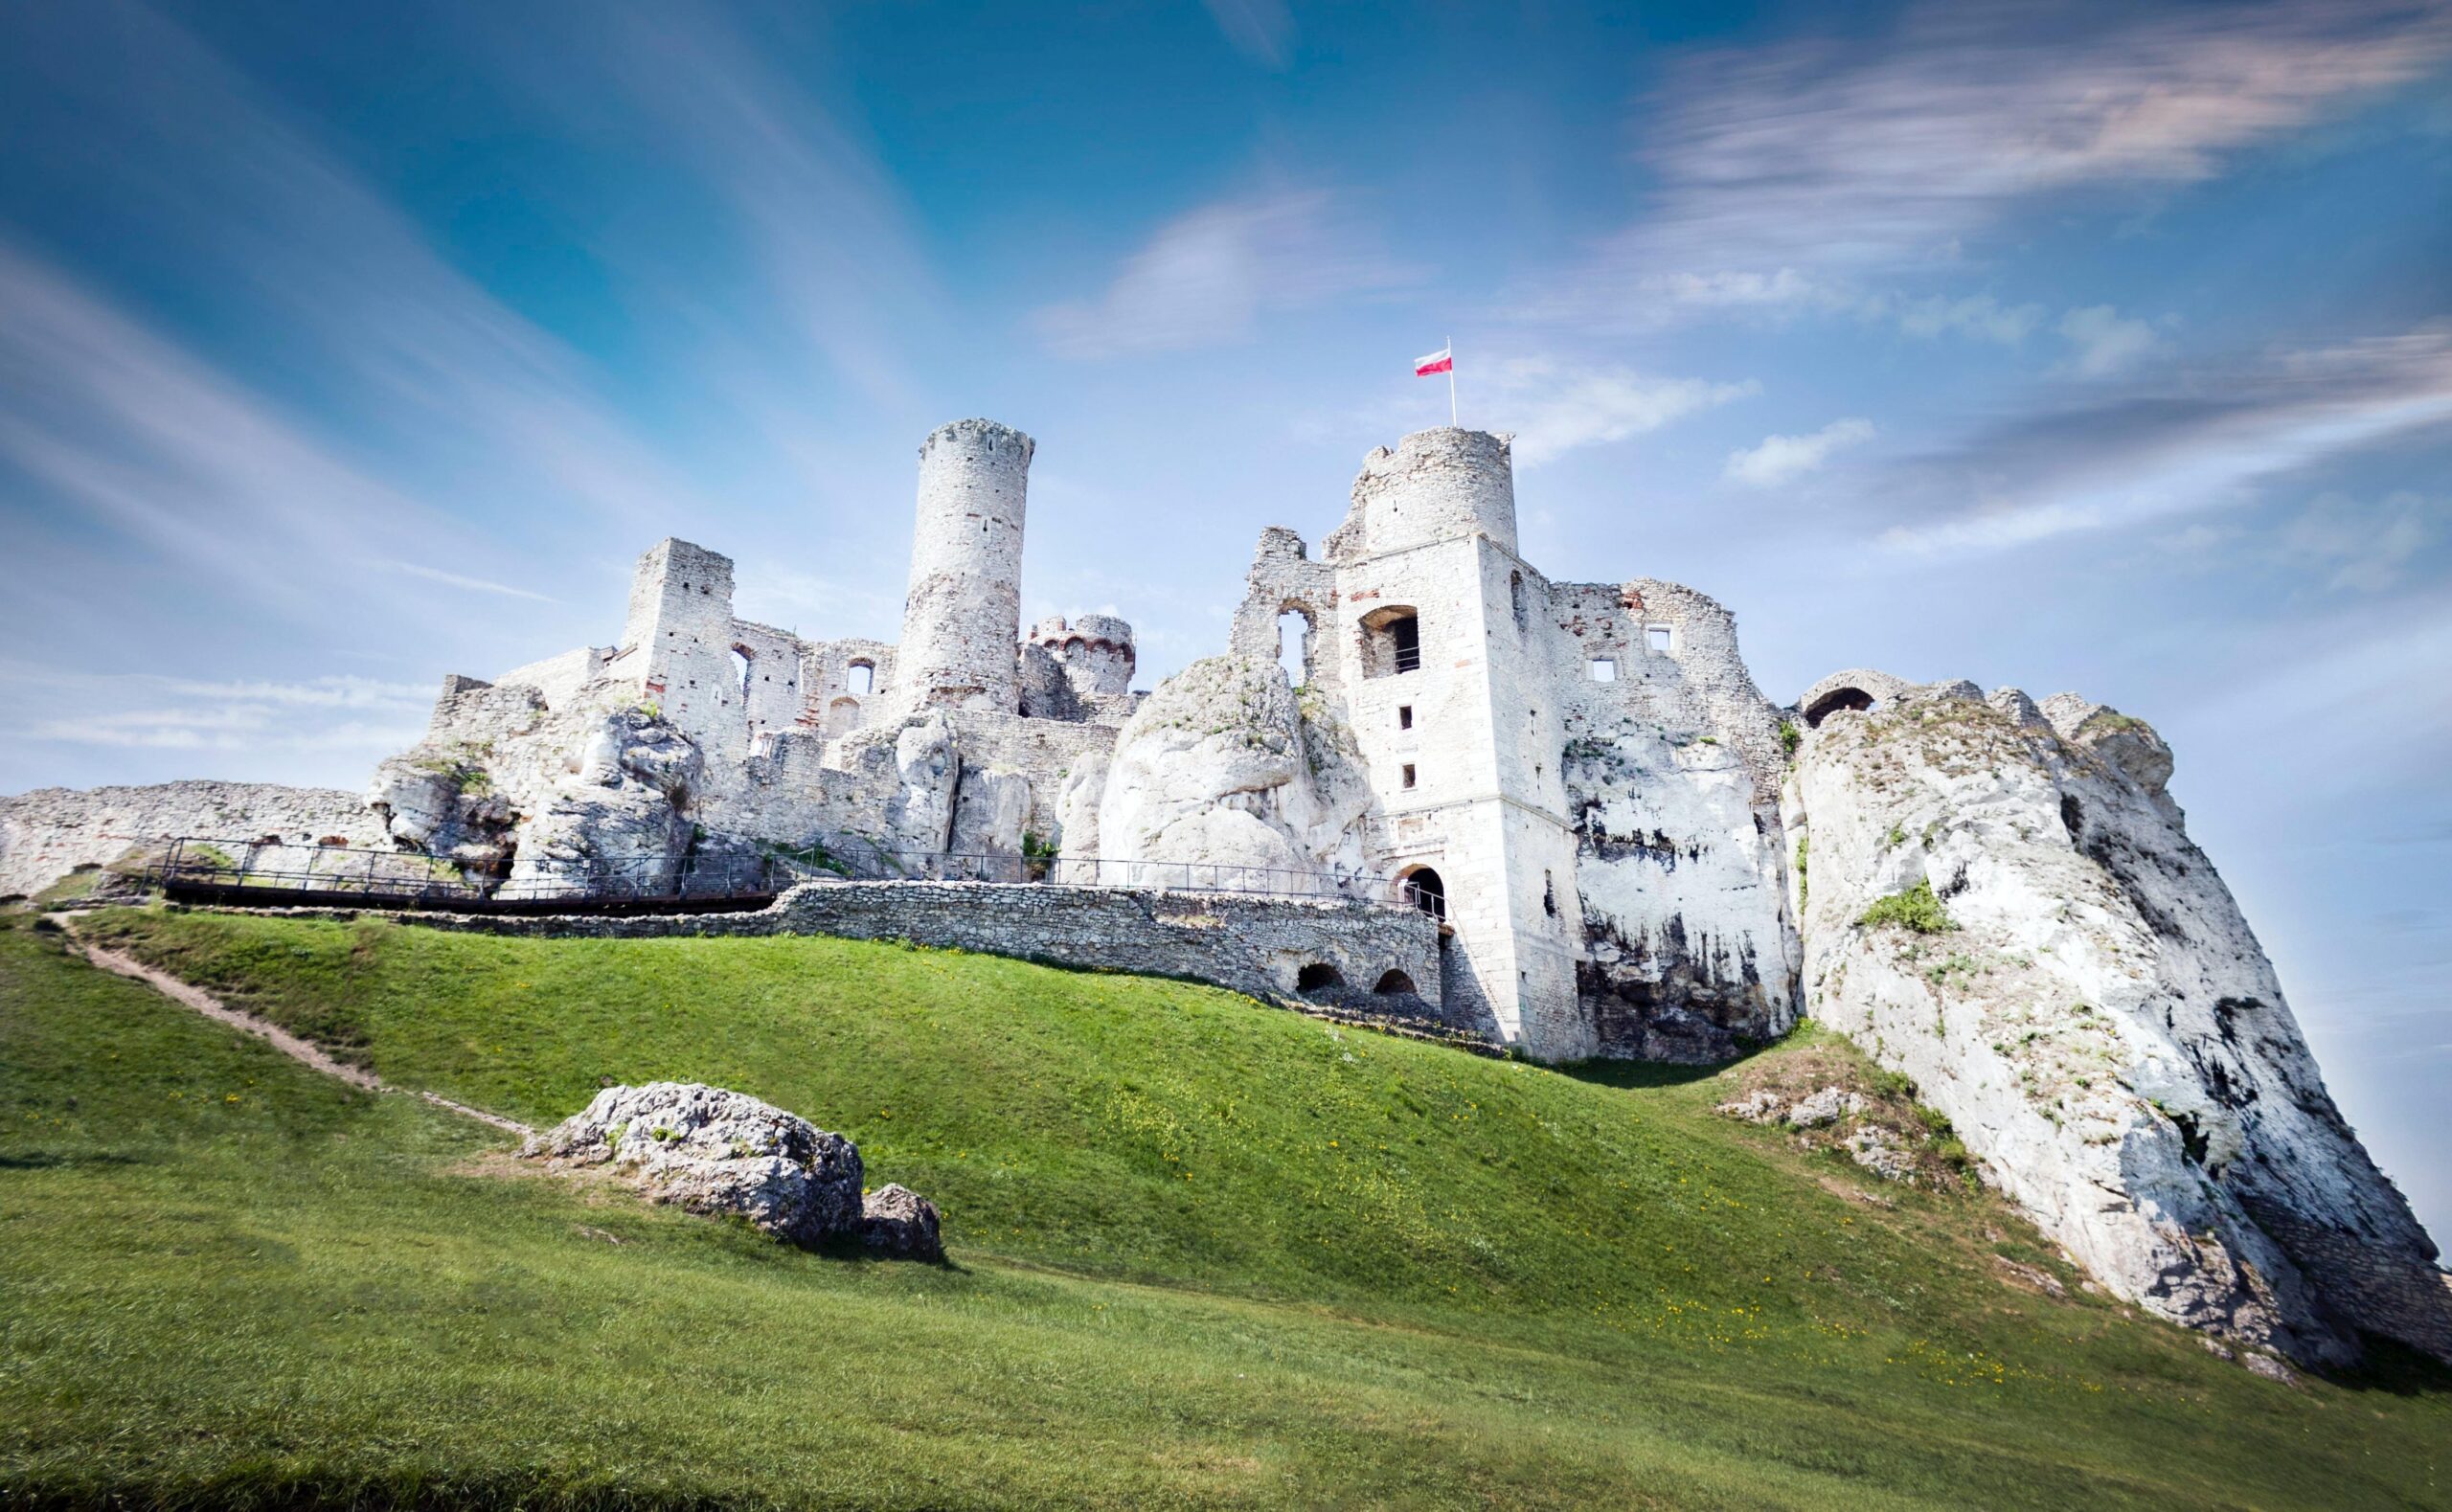 Beautiful low angle shot of the Eagles’ Nests Landscape Park’s castle in Poland